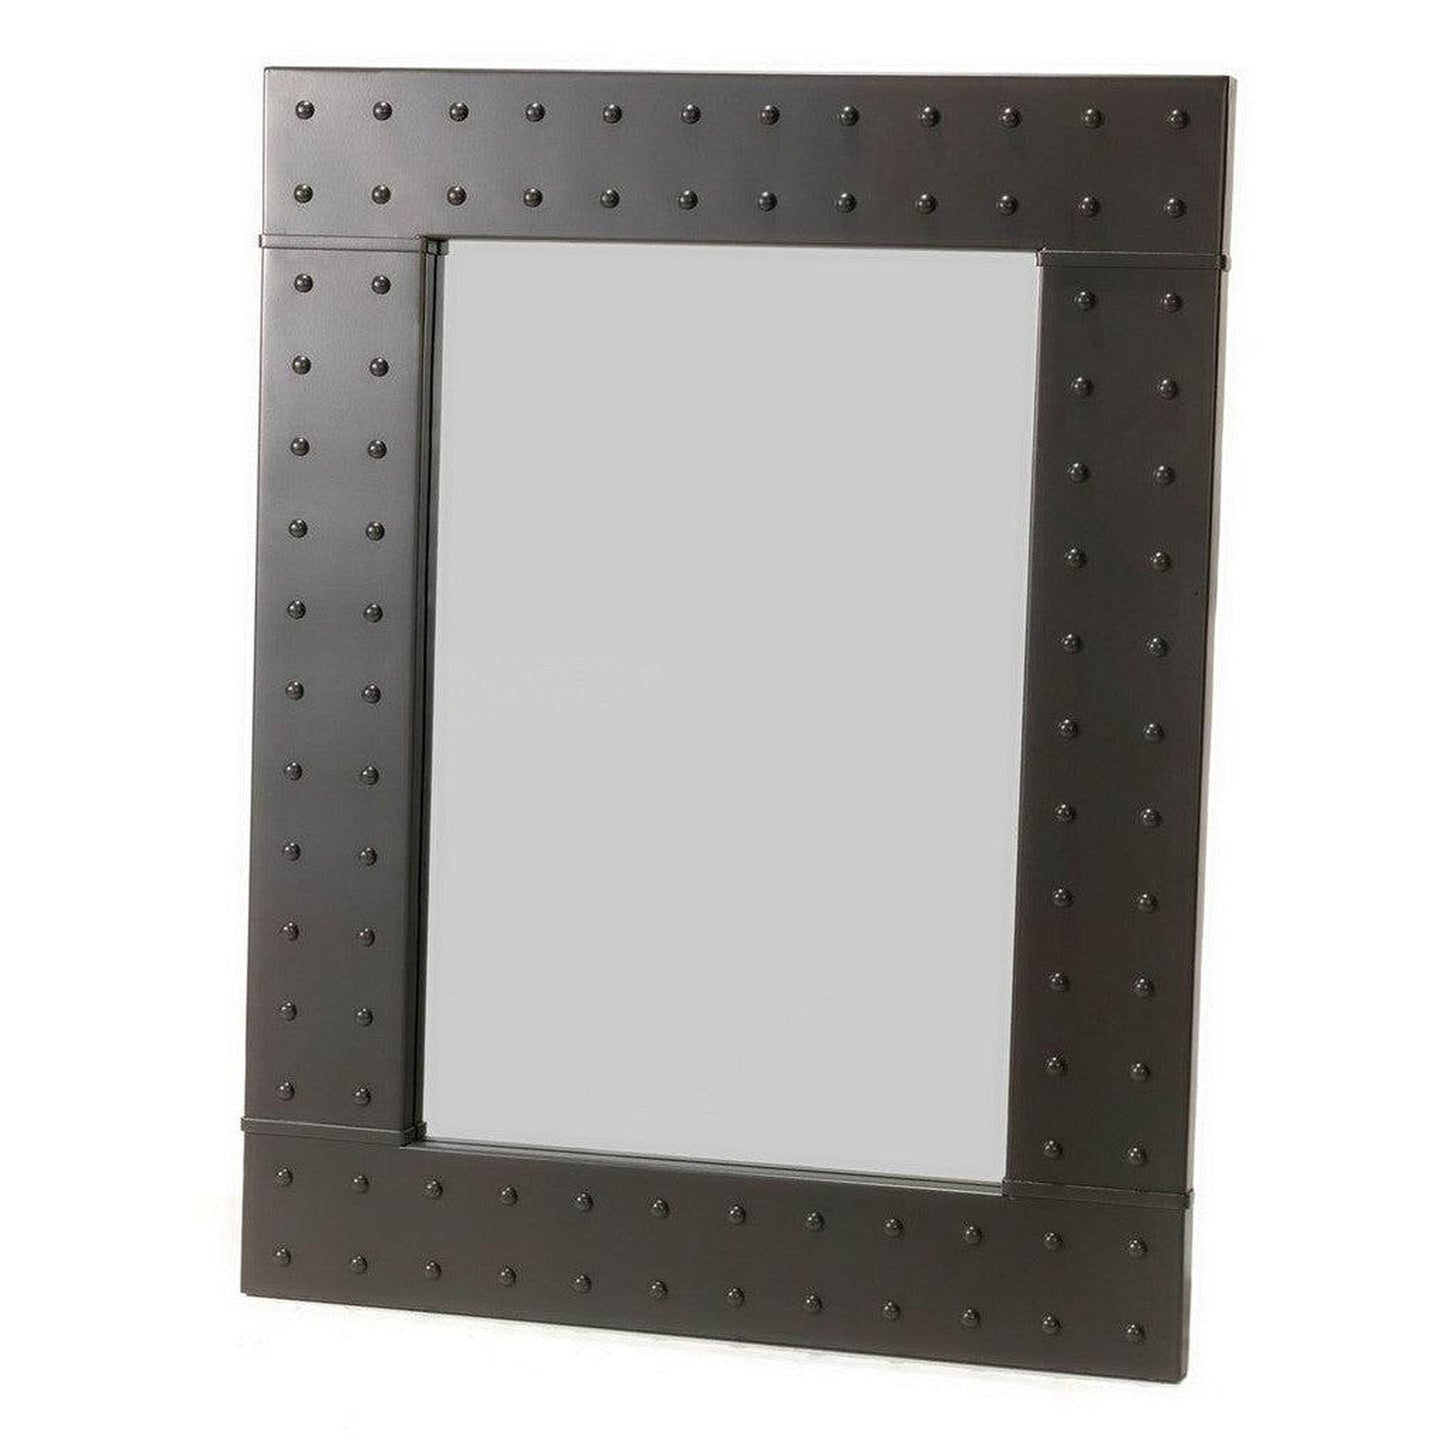 Stone County Ironworks Merrimack Rivet 31" x 35" Small Hand Rubbed Ivory Iron Wall Mirror With Pewter Iron Accent